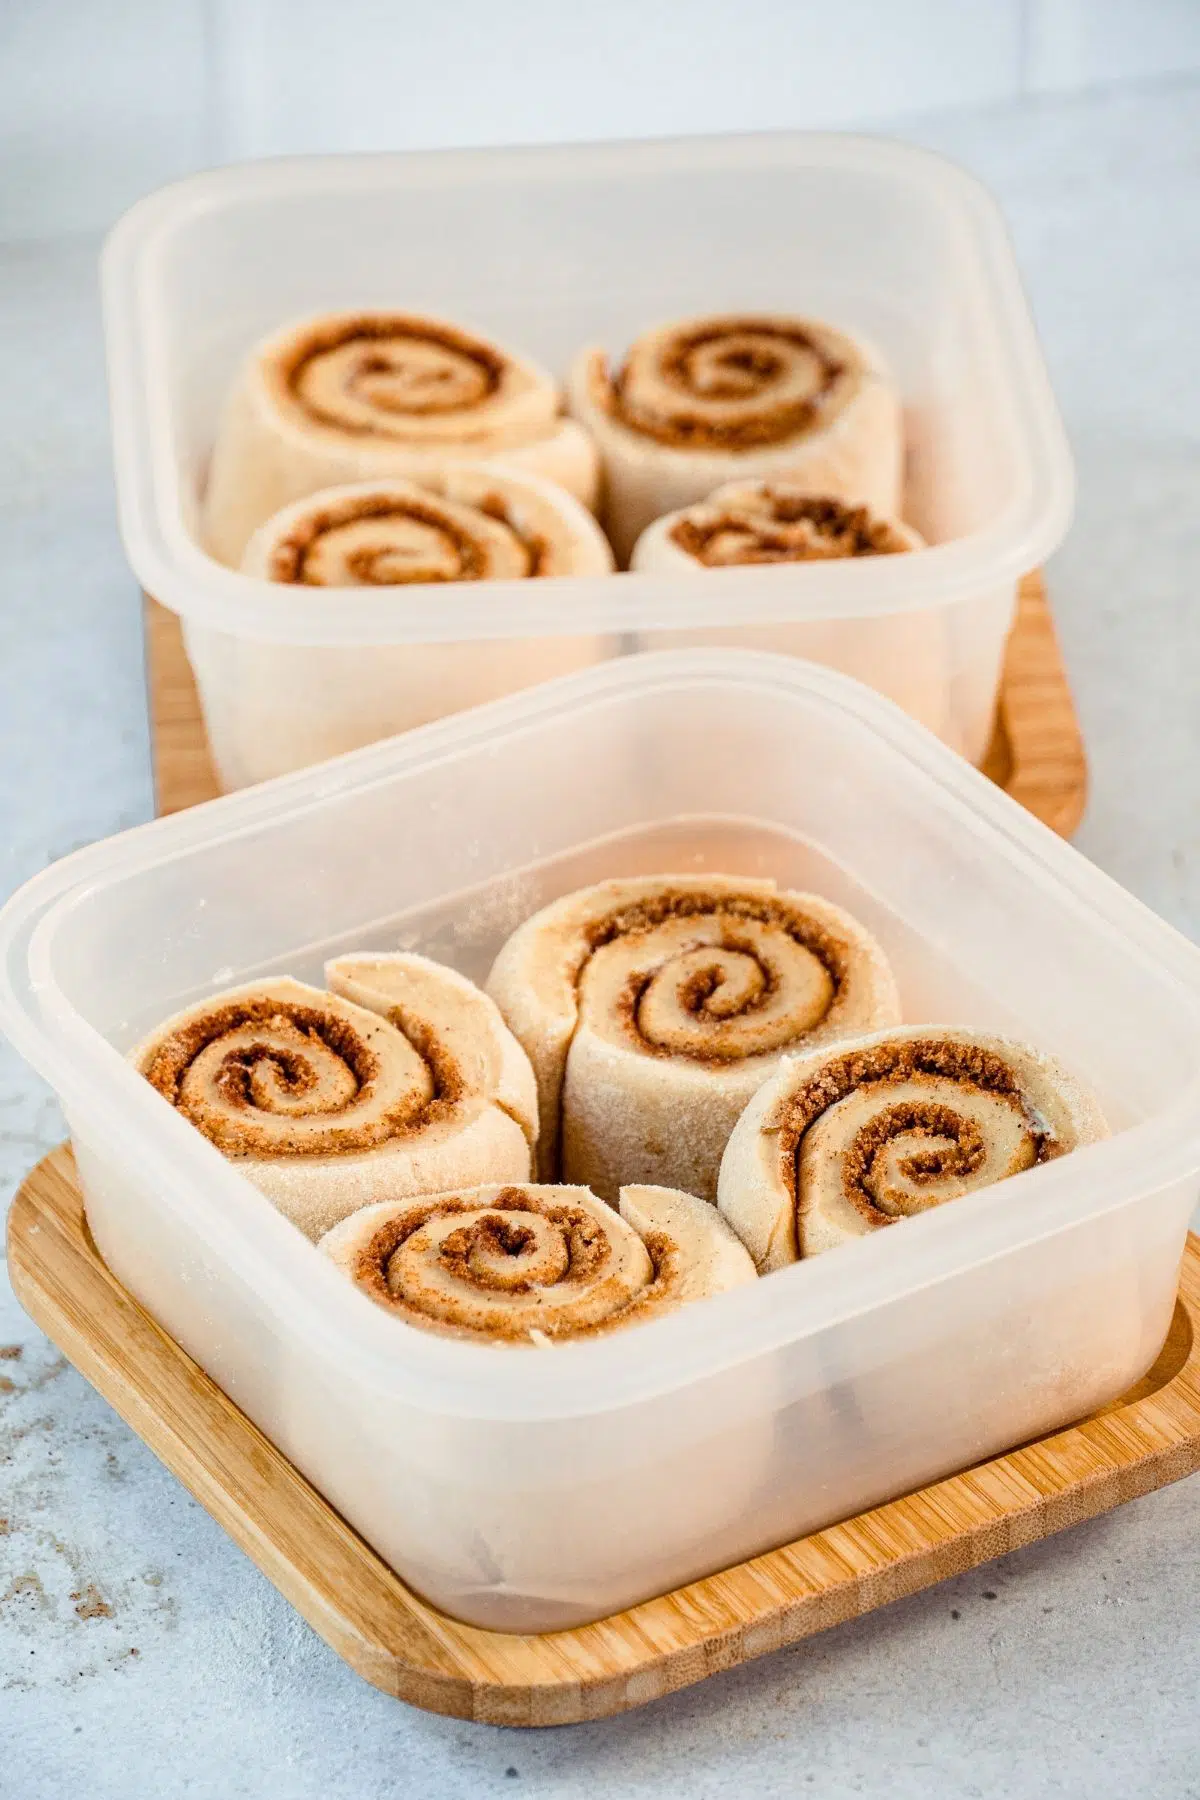 Cinnamon rolls in containers ready for storage